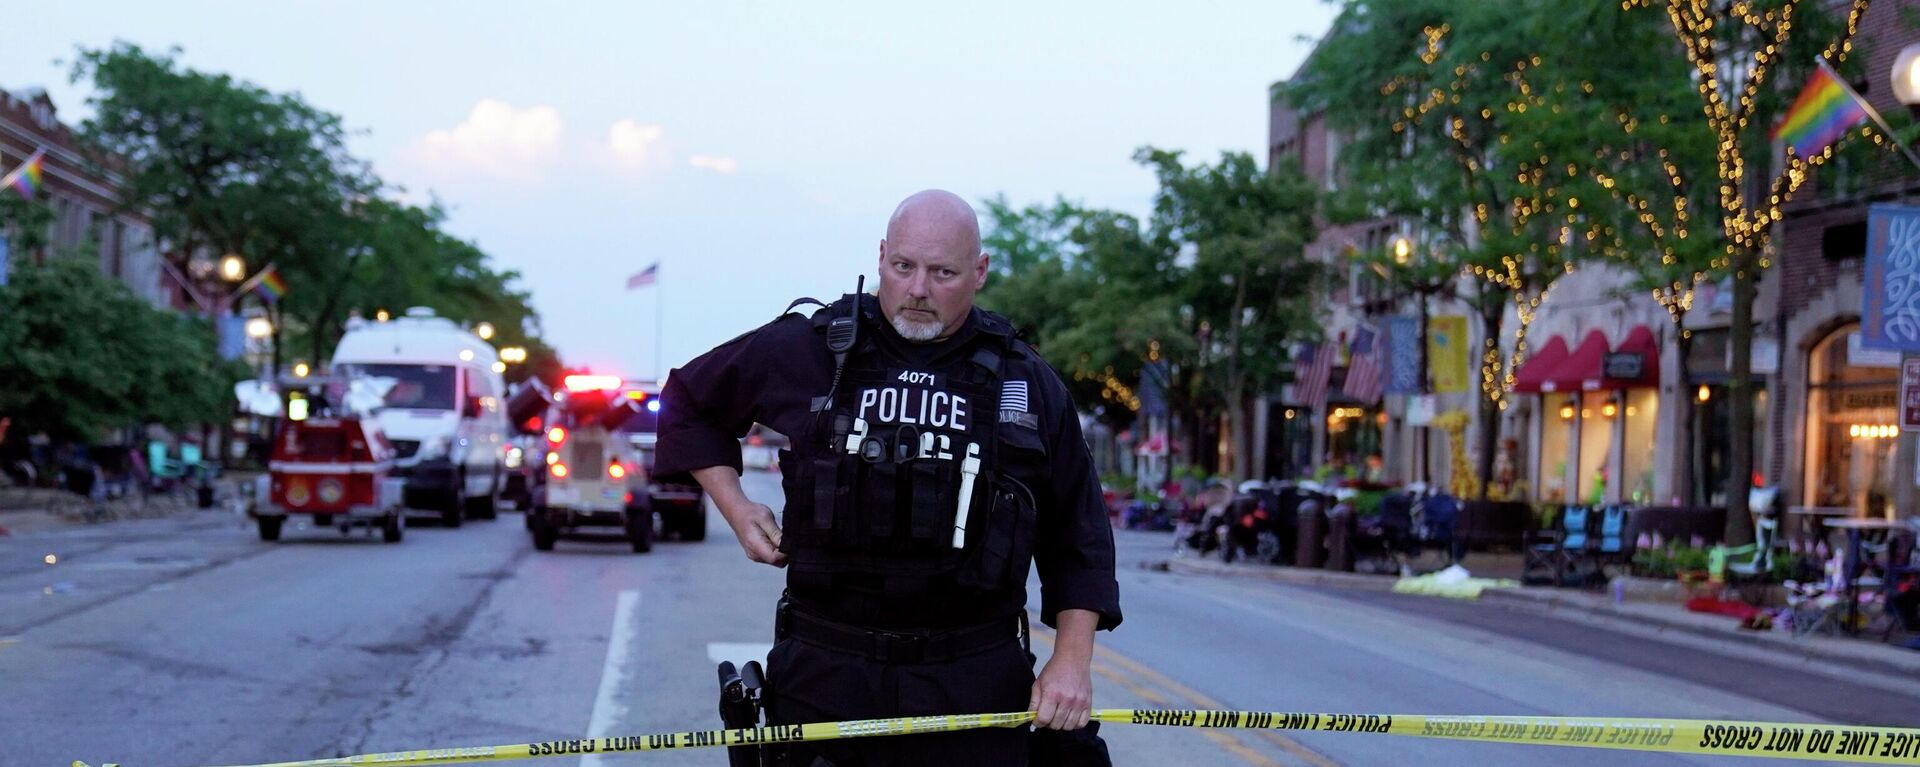 A police officer holds up police tape at the scene of a mass shooting at the Highland Park Fourth of July parade in downtown Highland Park, a Chicago suburb, on Monday, July 4, 2022. (AP Photo/Nam Y. Huh) - Sputnik International, 1920, 05.07.2022